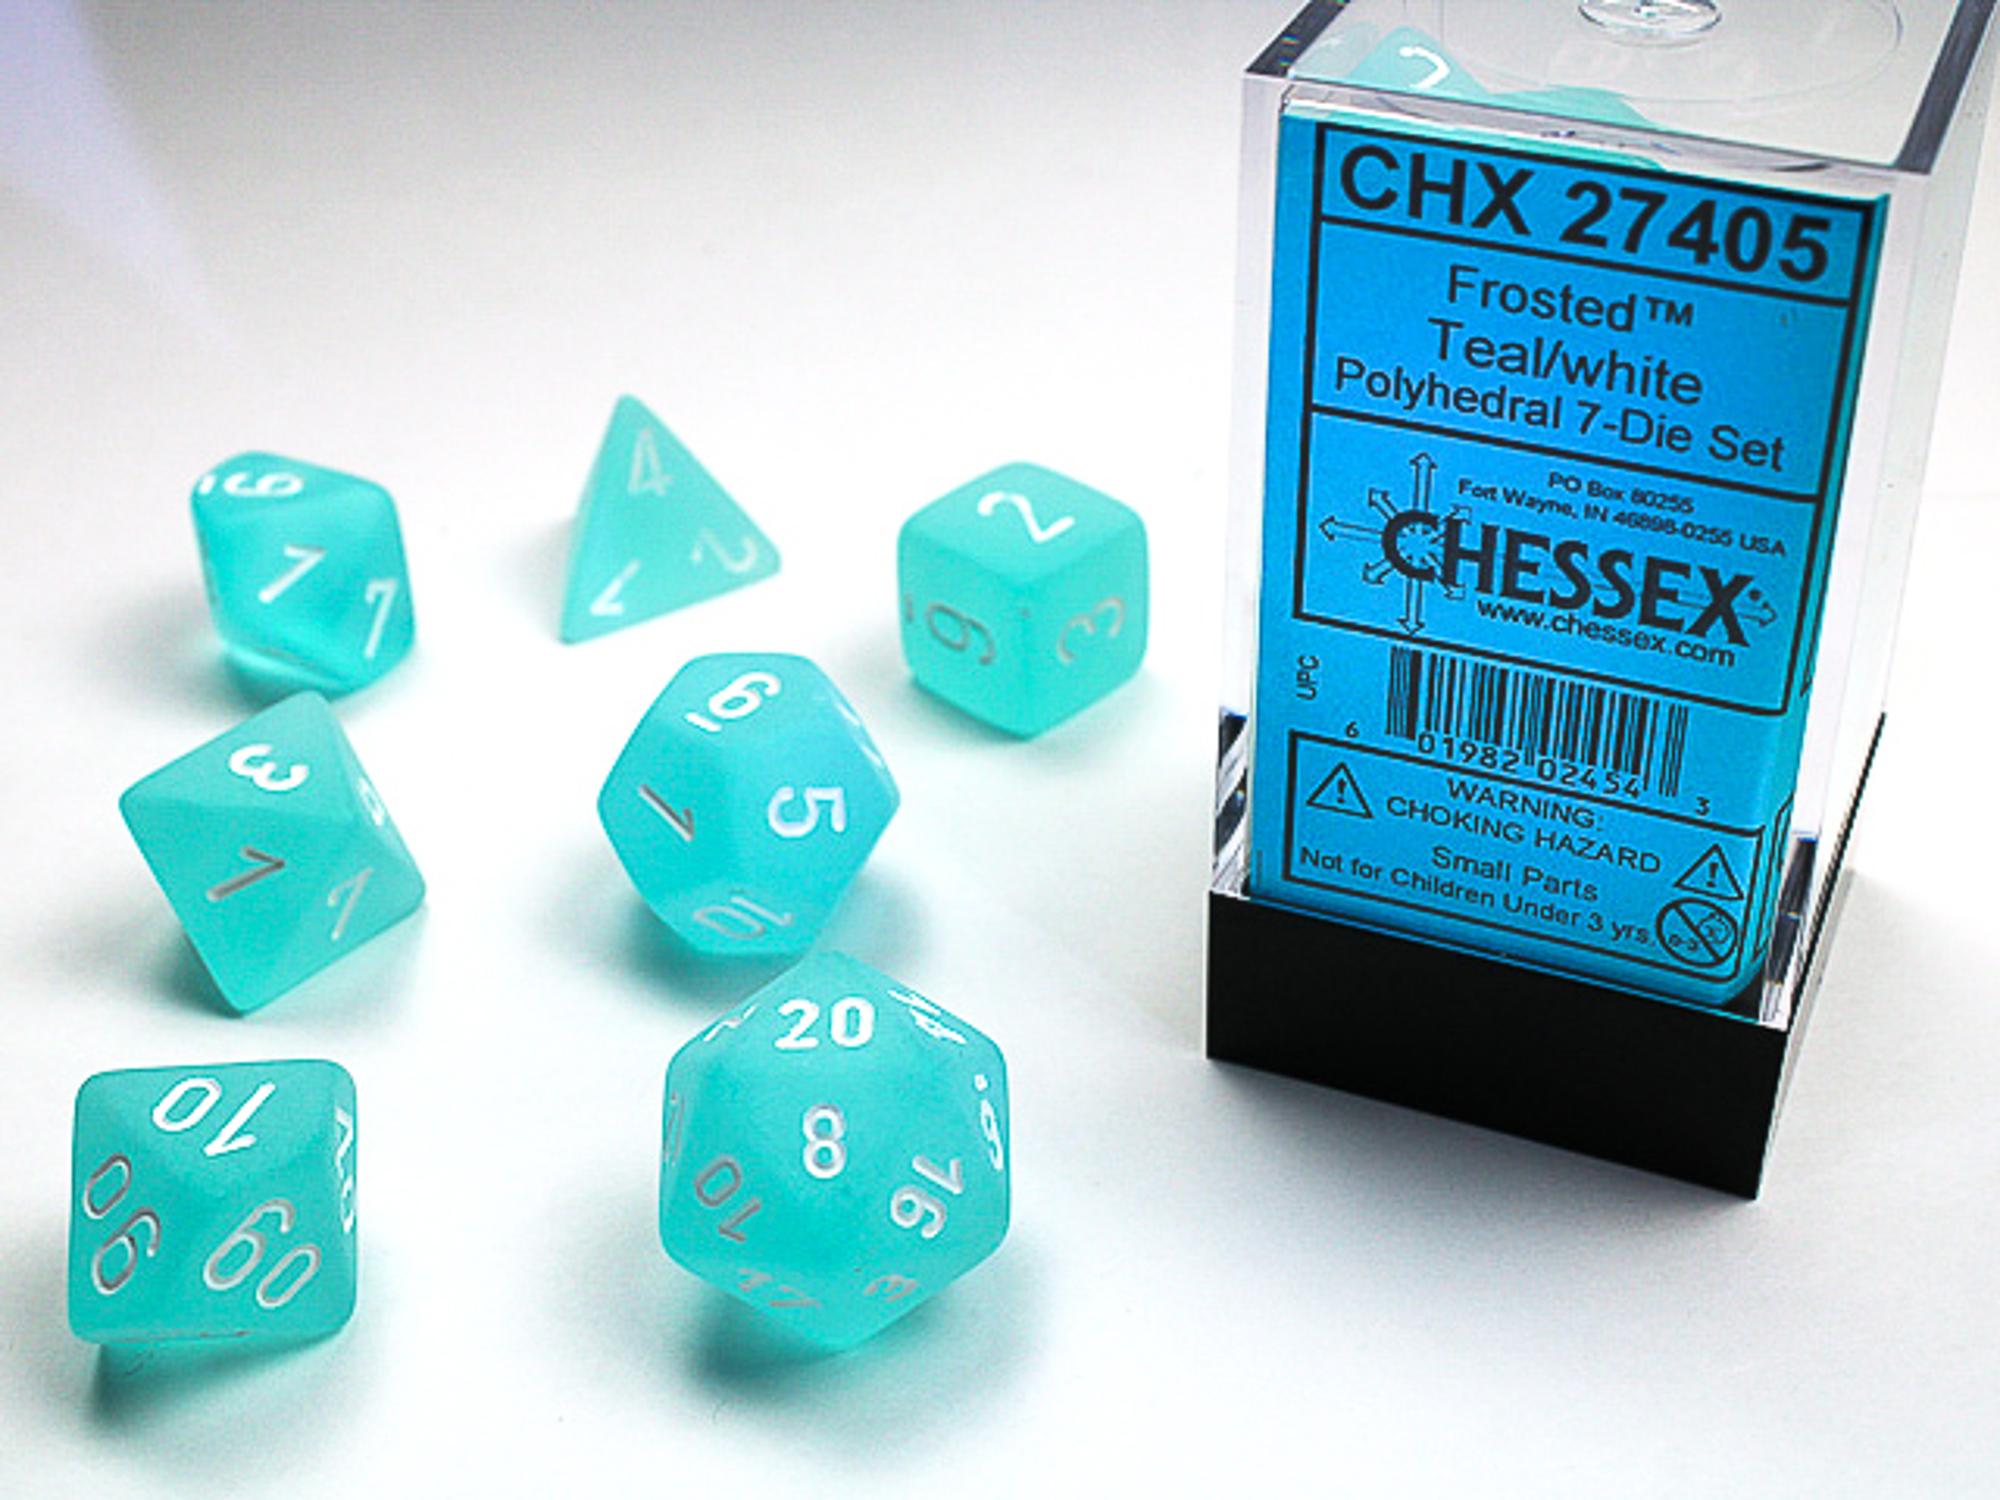 Frosted Teal-White with White 7 Die Set